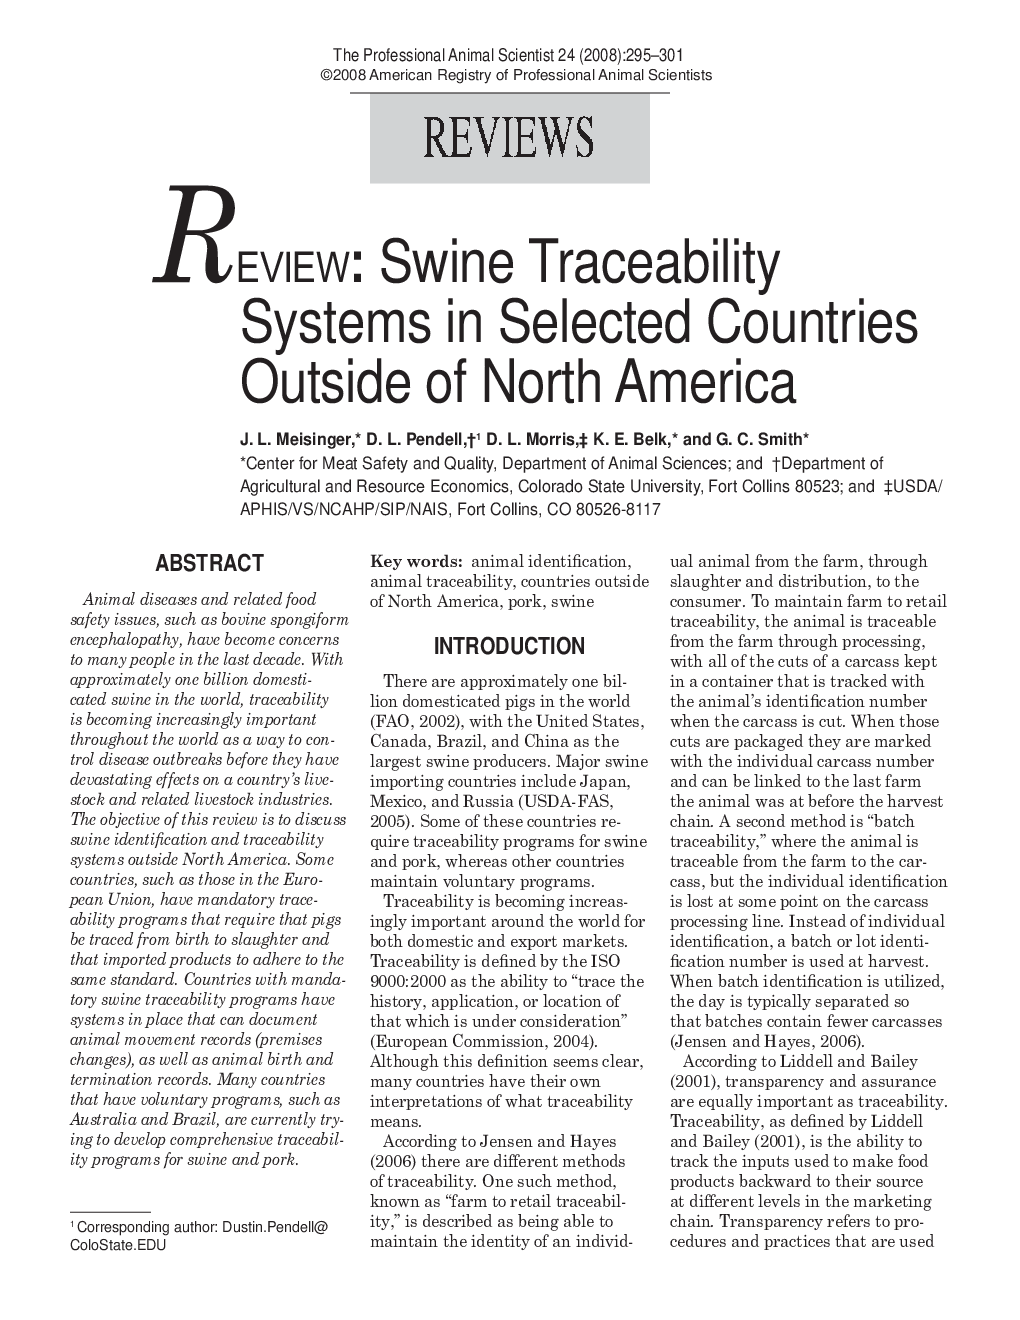 REVIEW: Swine Traceability Systems in Selected Countries Outside of North America